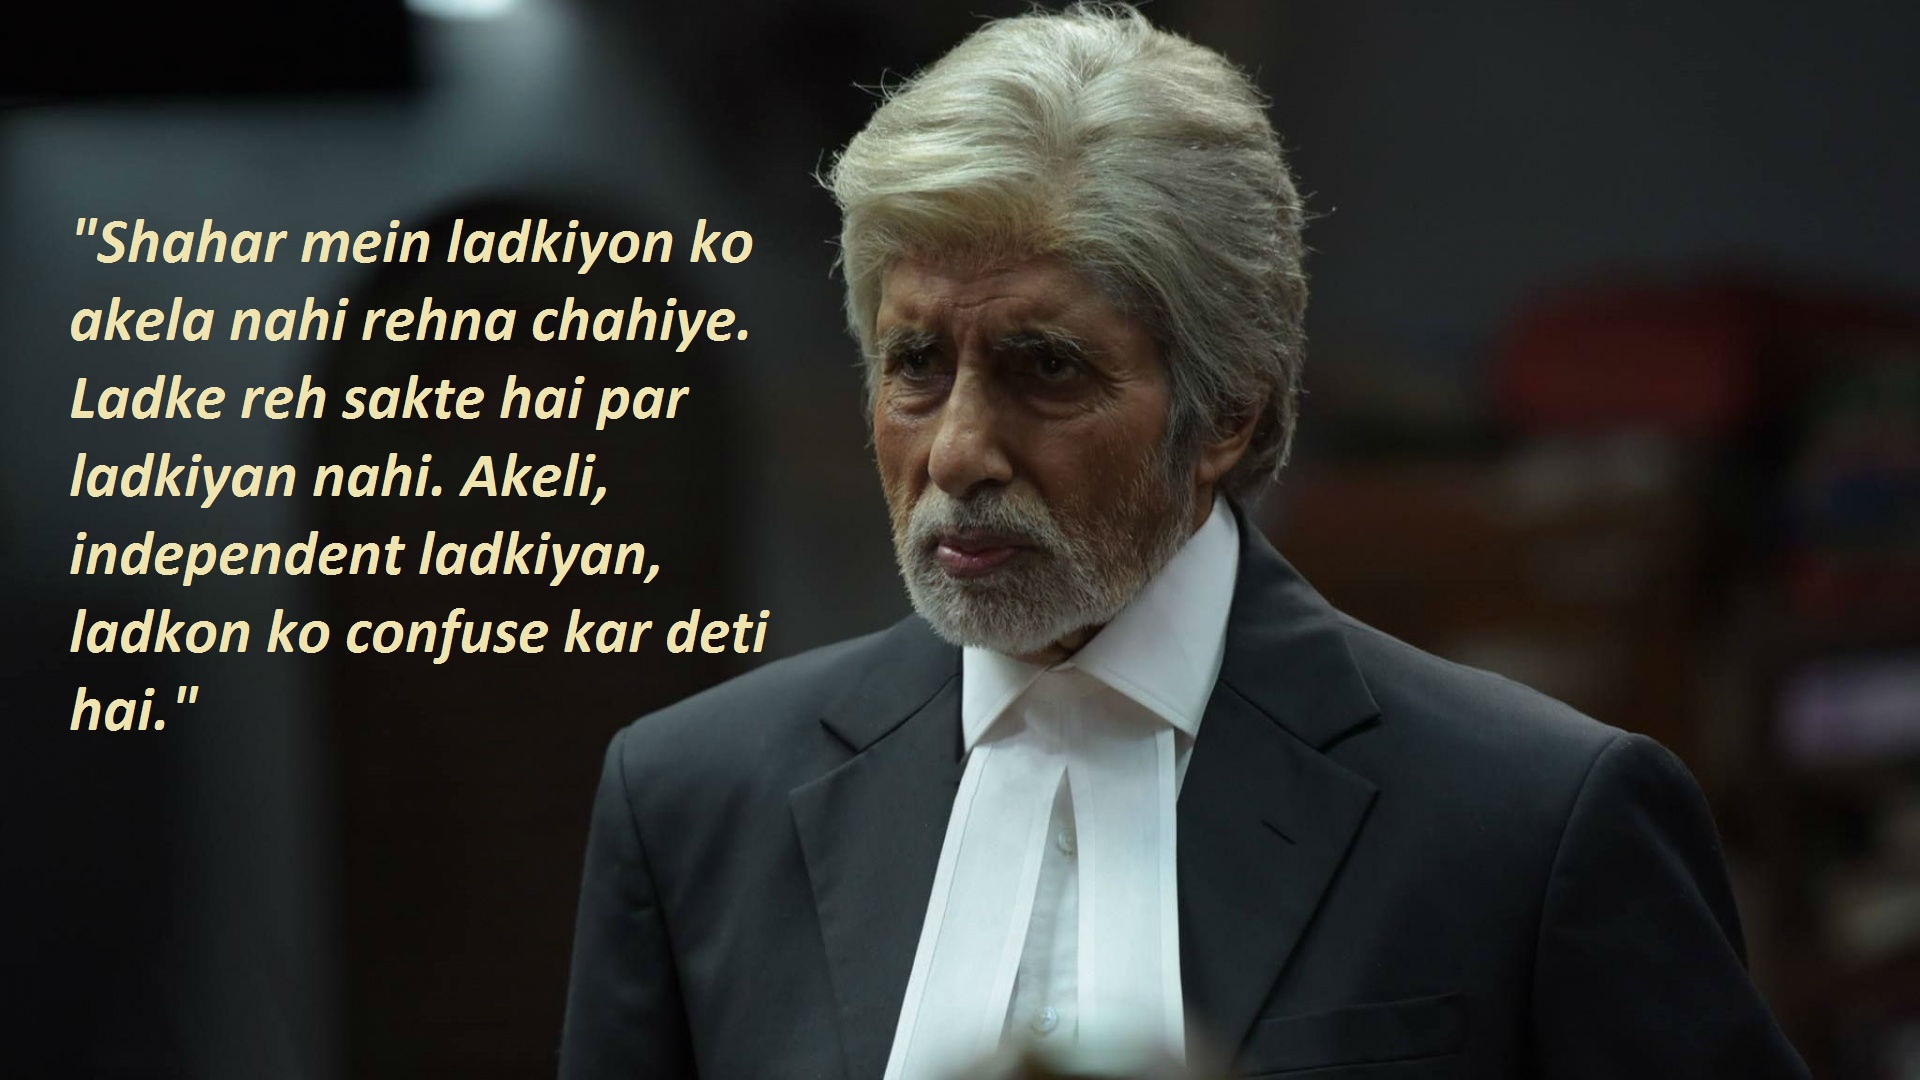 6. Best Dialogues From PINK Movie